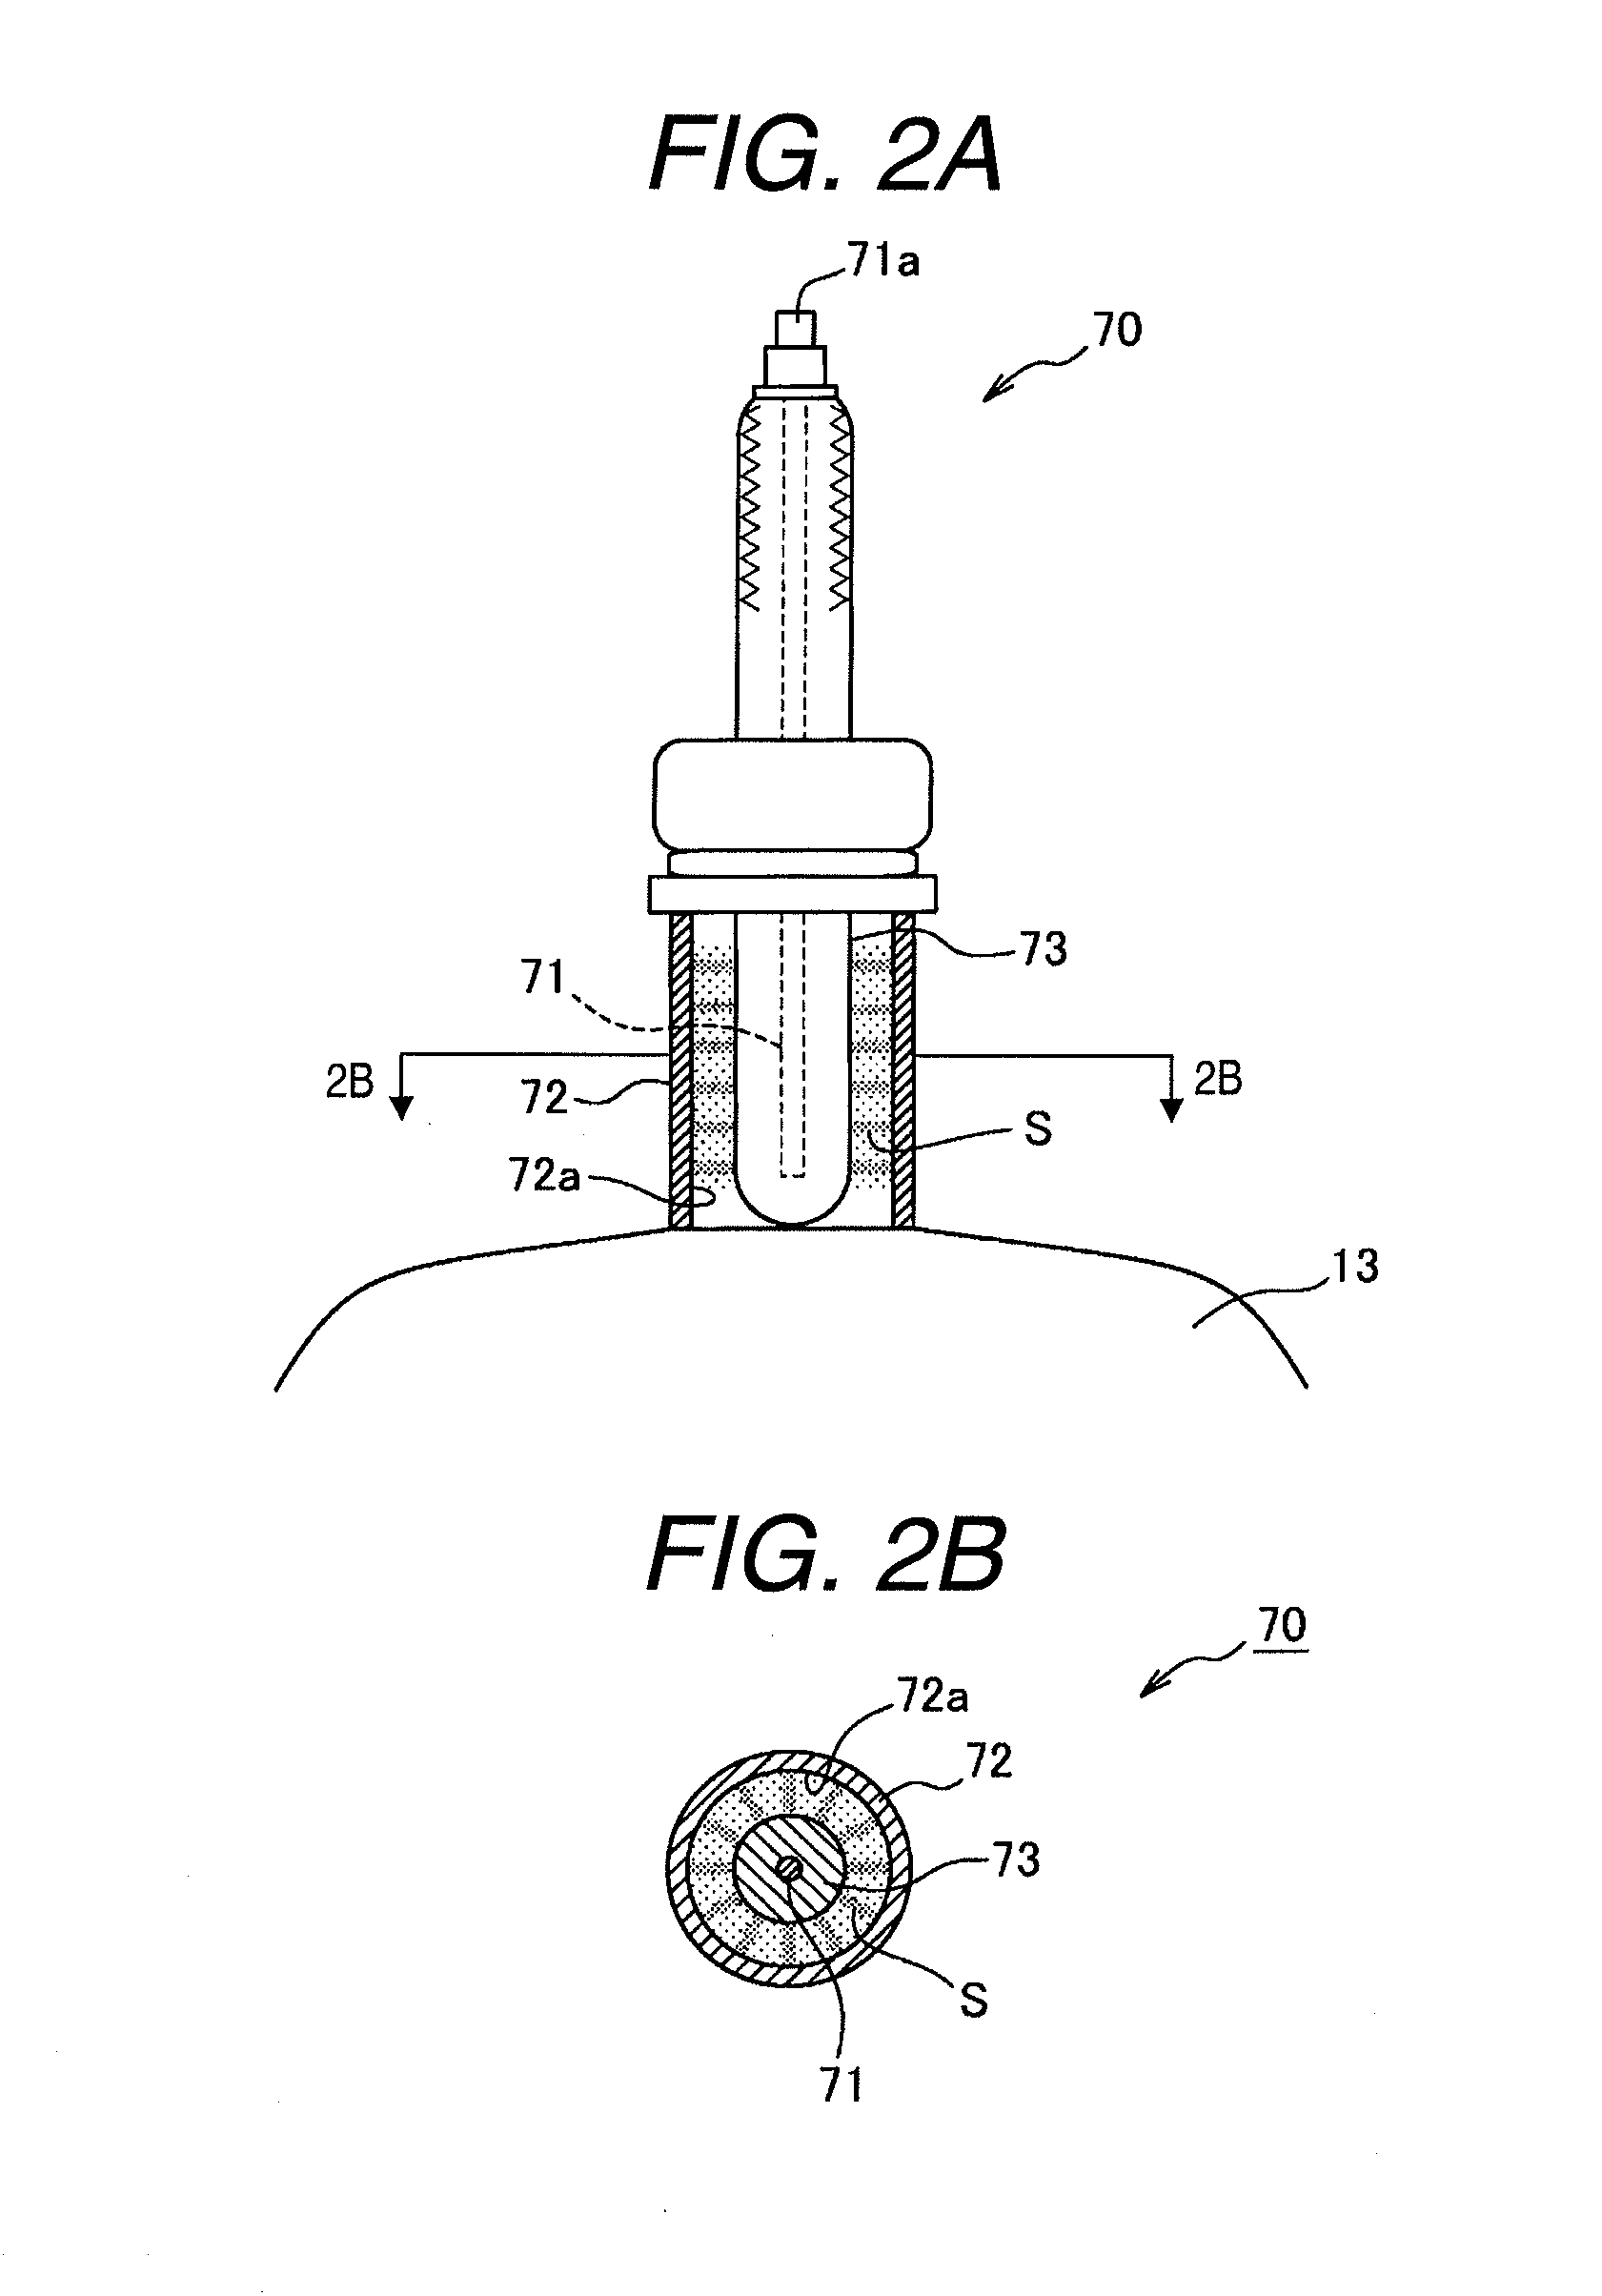 Internal combustion engine electric discharge structure